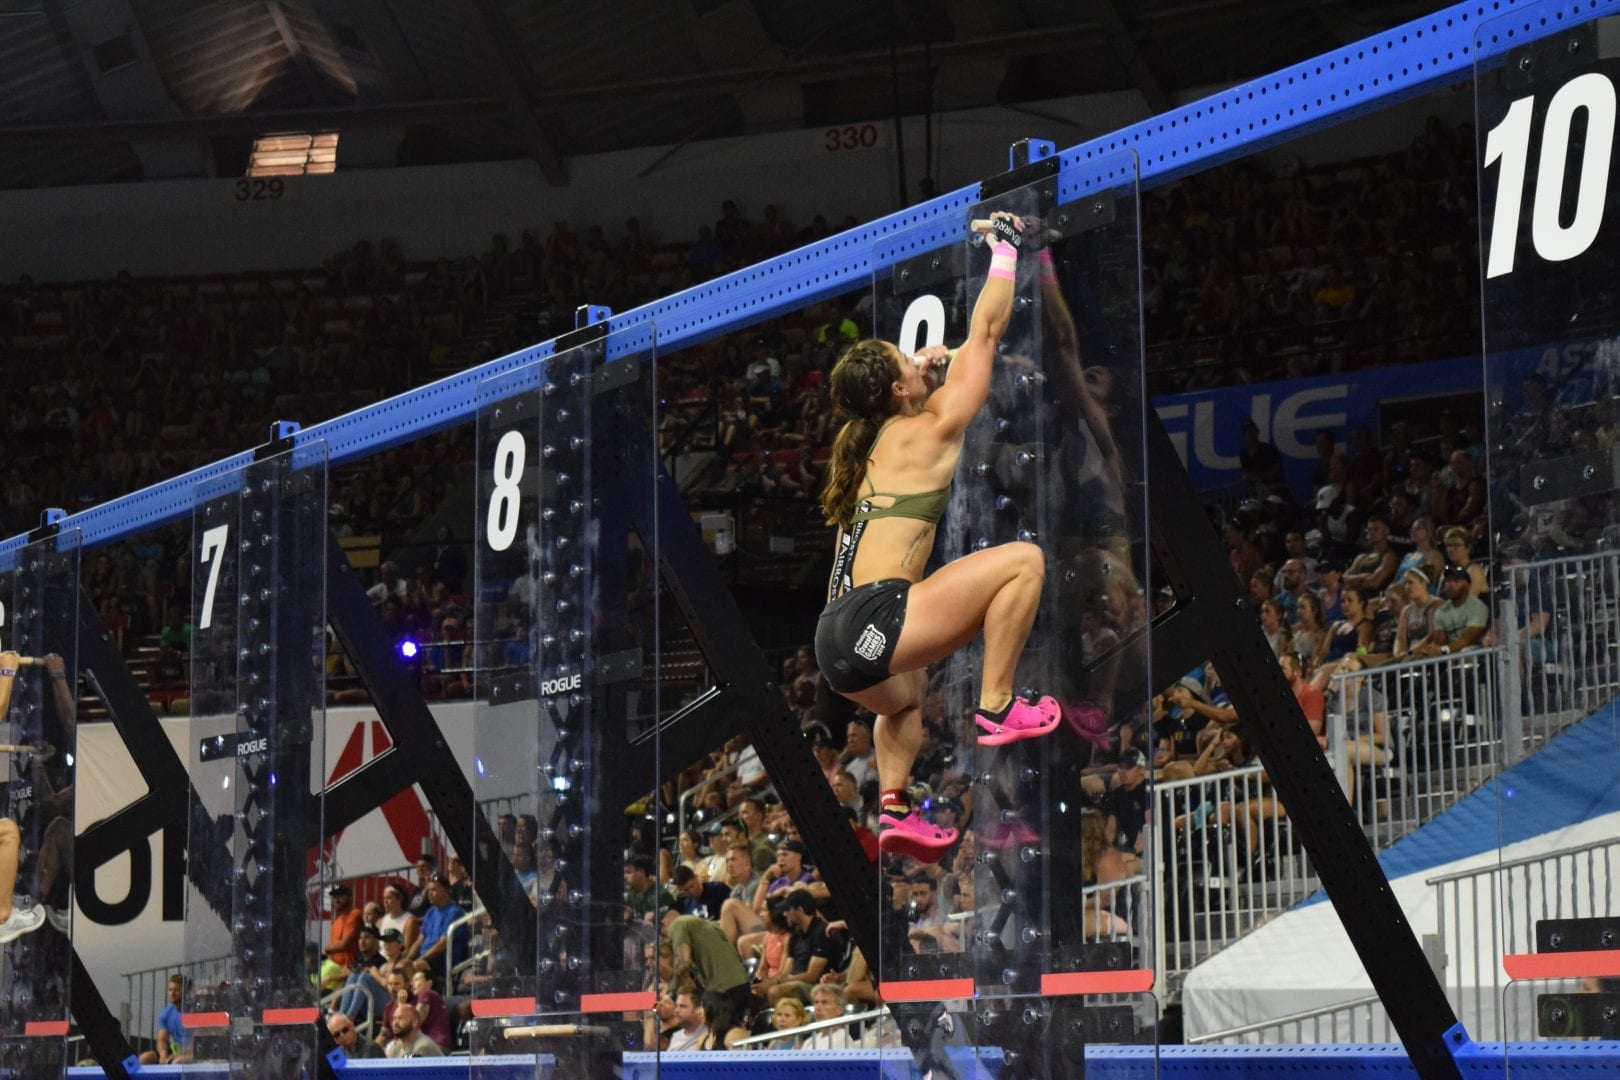 Bethany Shadburne climbs pegboards in the coliseum at the 2019 CrossFit Games.